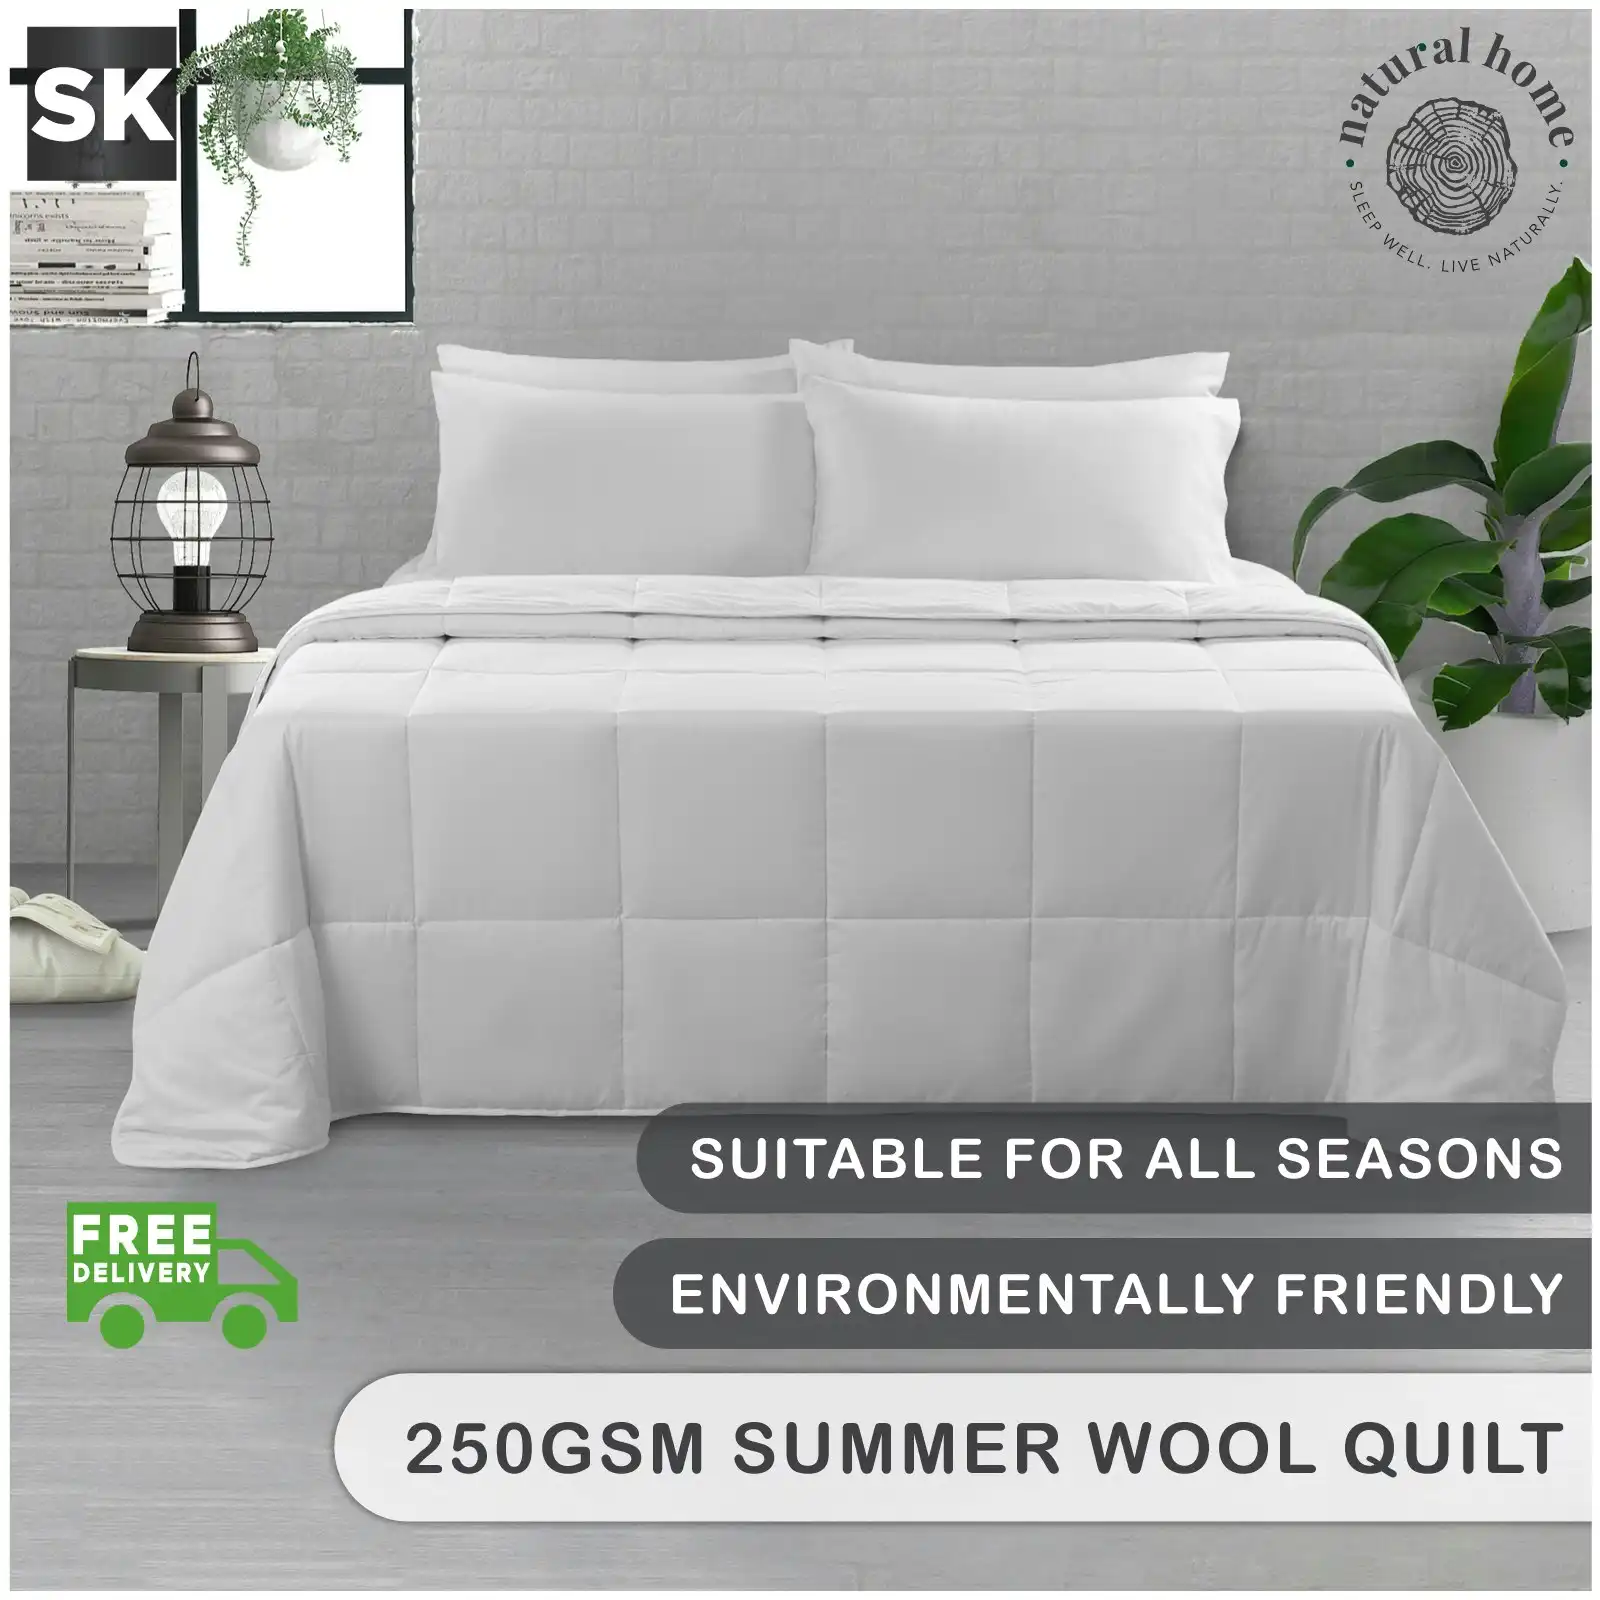 Natural Home Summer Wool Quilt 250gsm White Super King Bed